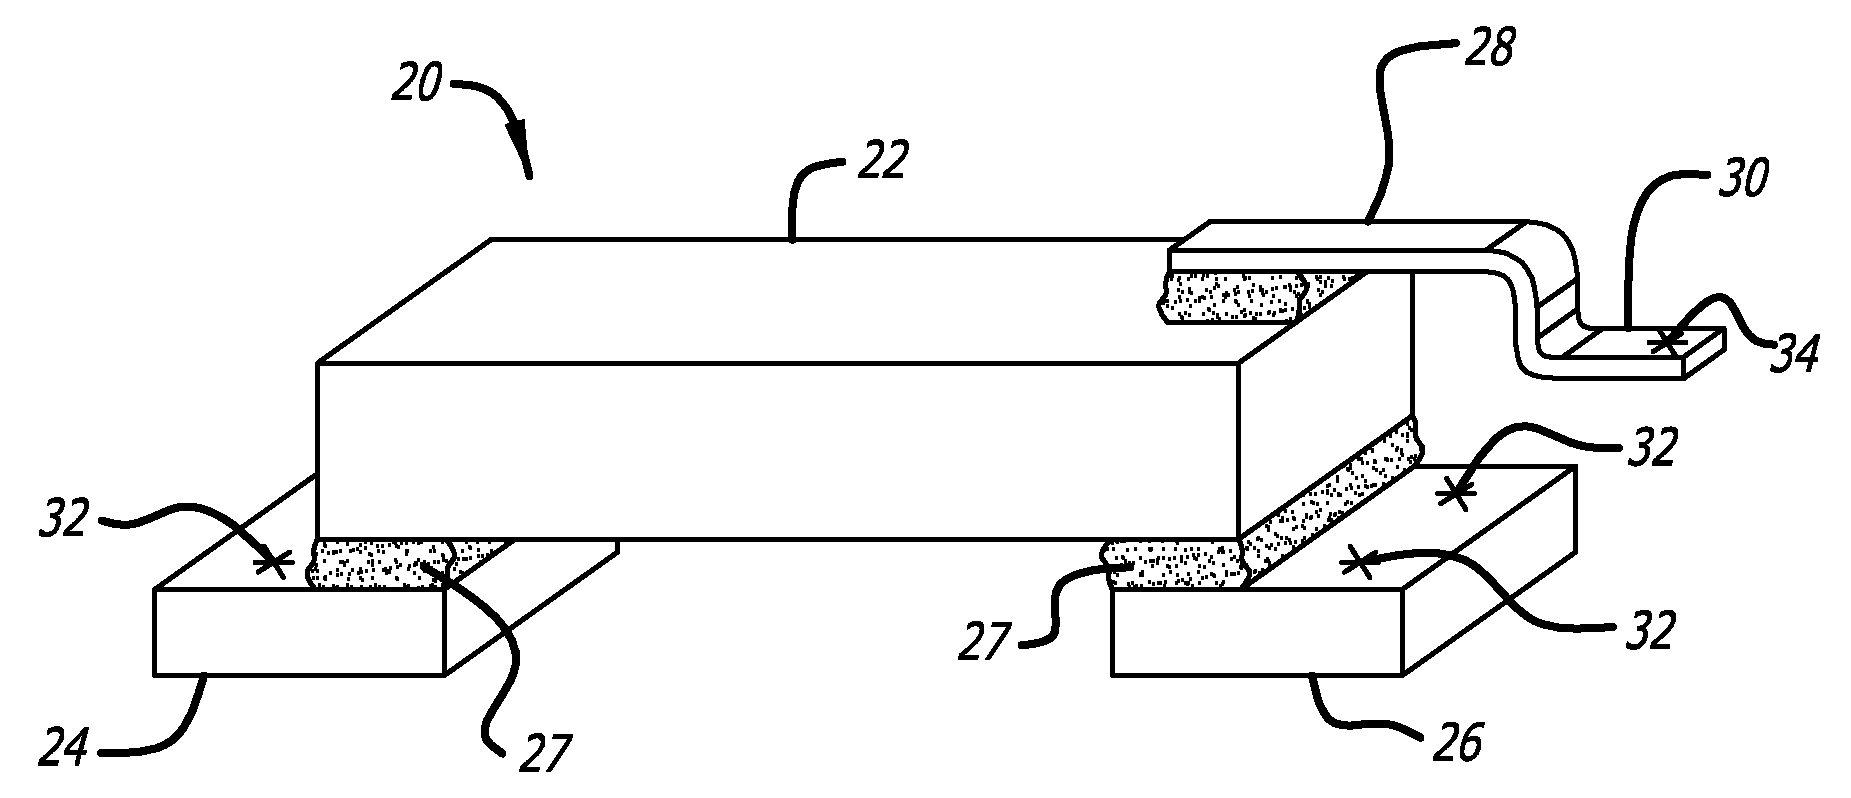 Wireless Microactuator Motor Assembly for Use in a Hard Disk Drive Suspension, and Mechanical and Electrical Connections Thereto